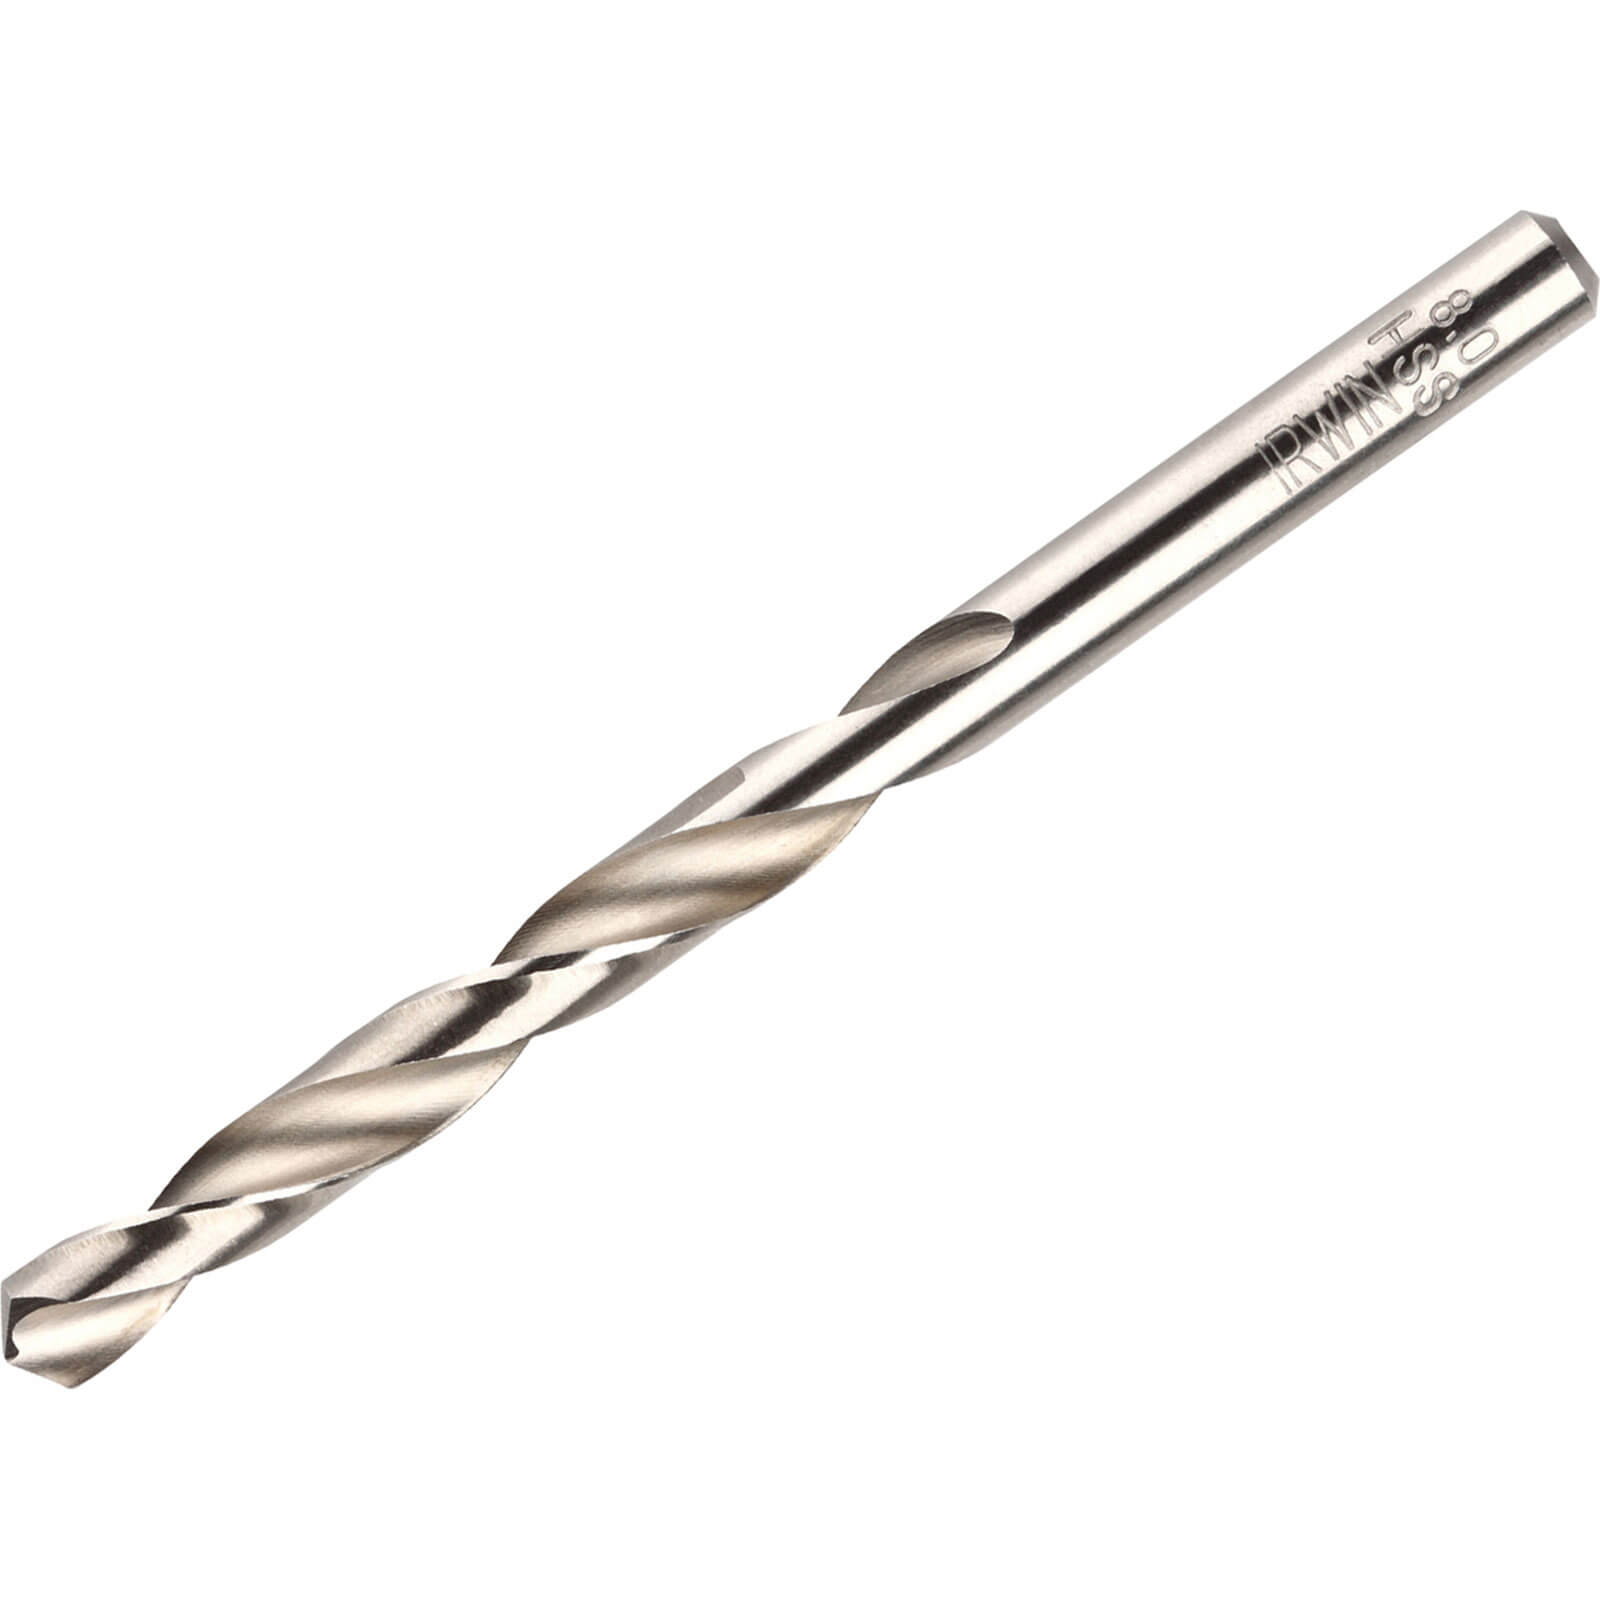 Photo of Irwin Hss Pro Drill Bits 3.3mm Pack Of 1